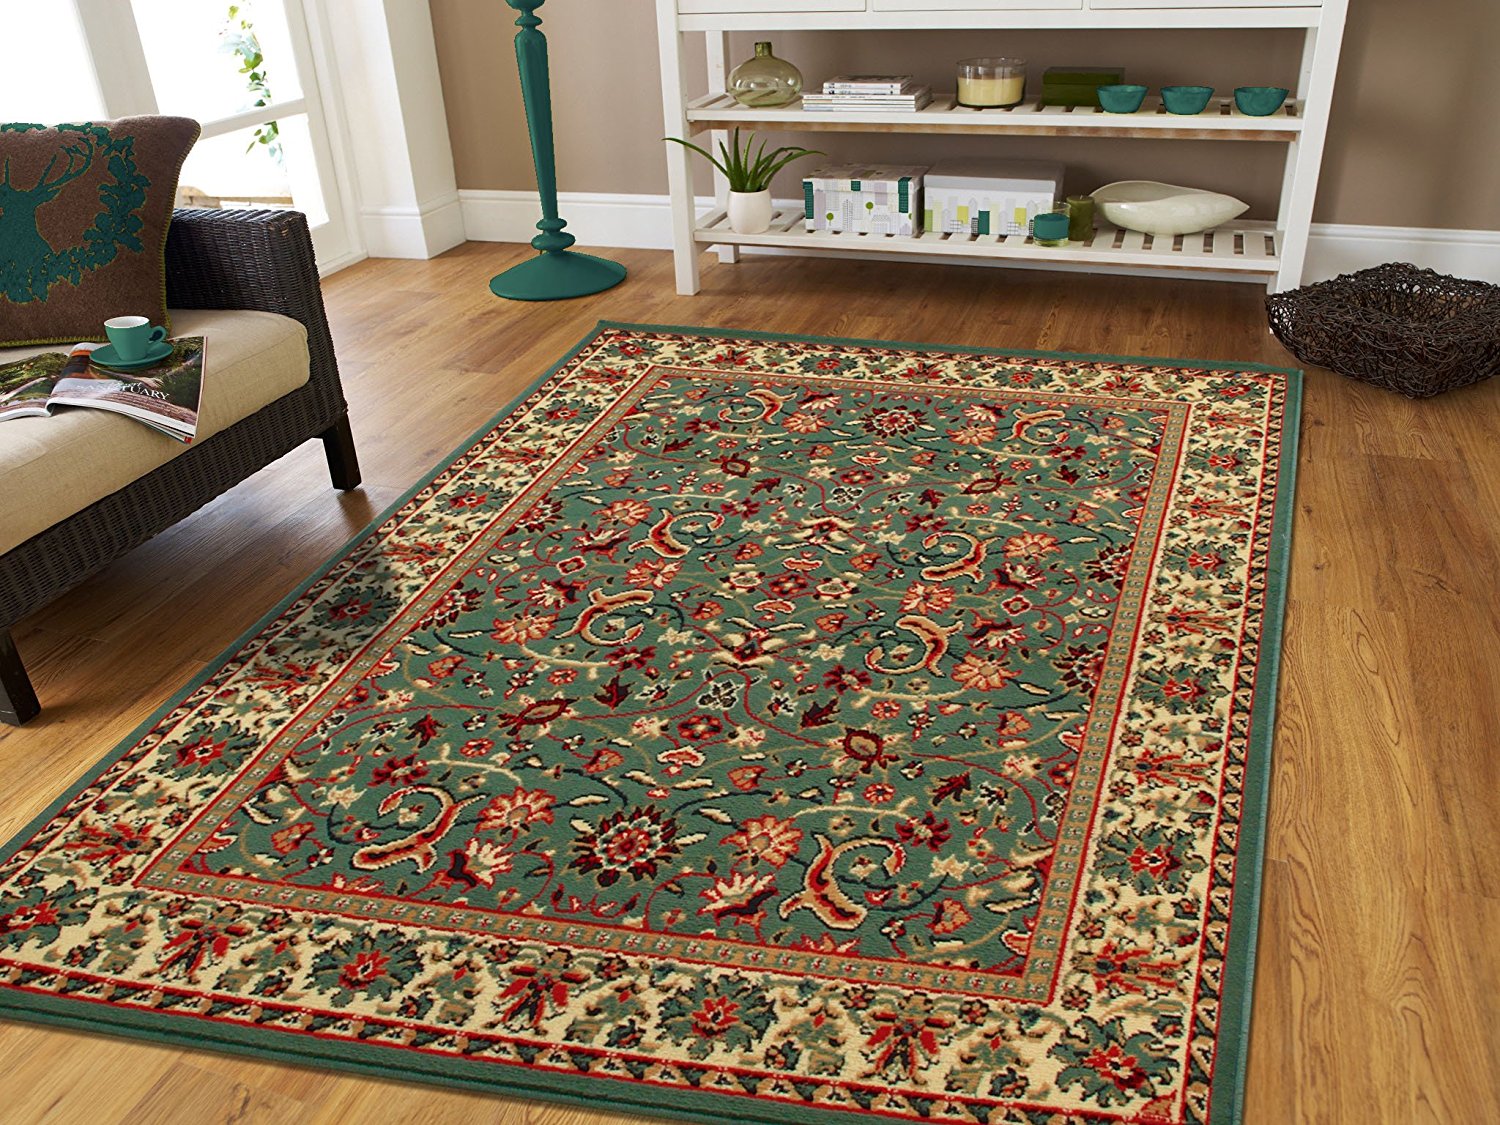 Clearance rugs, true décor material